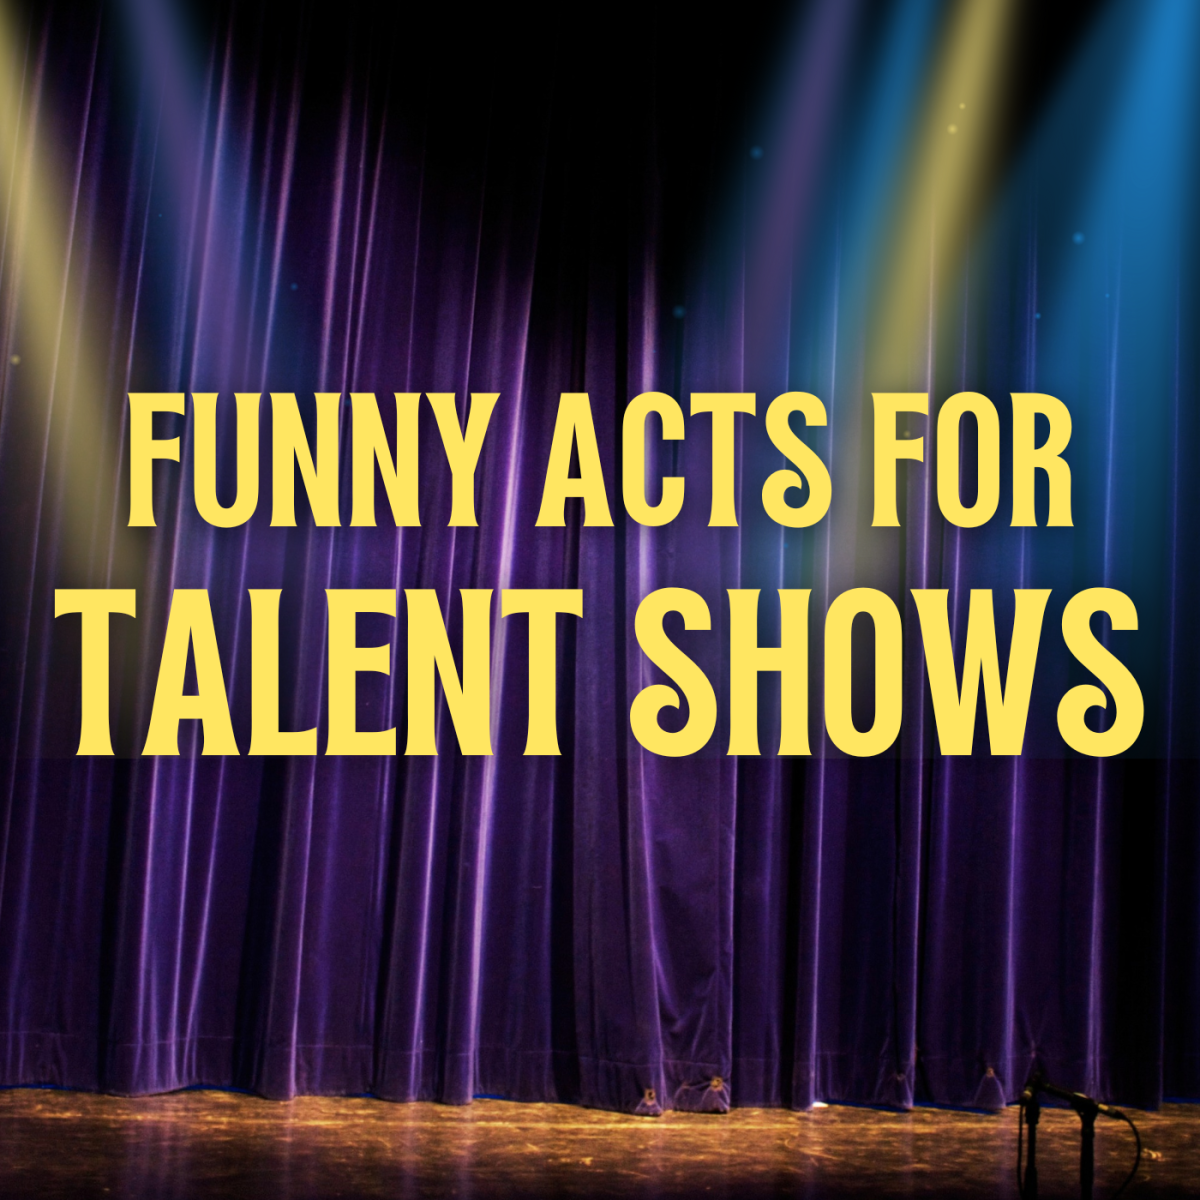 Funny Talent Show Ideas for Kids or Adults - HobbyLark